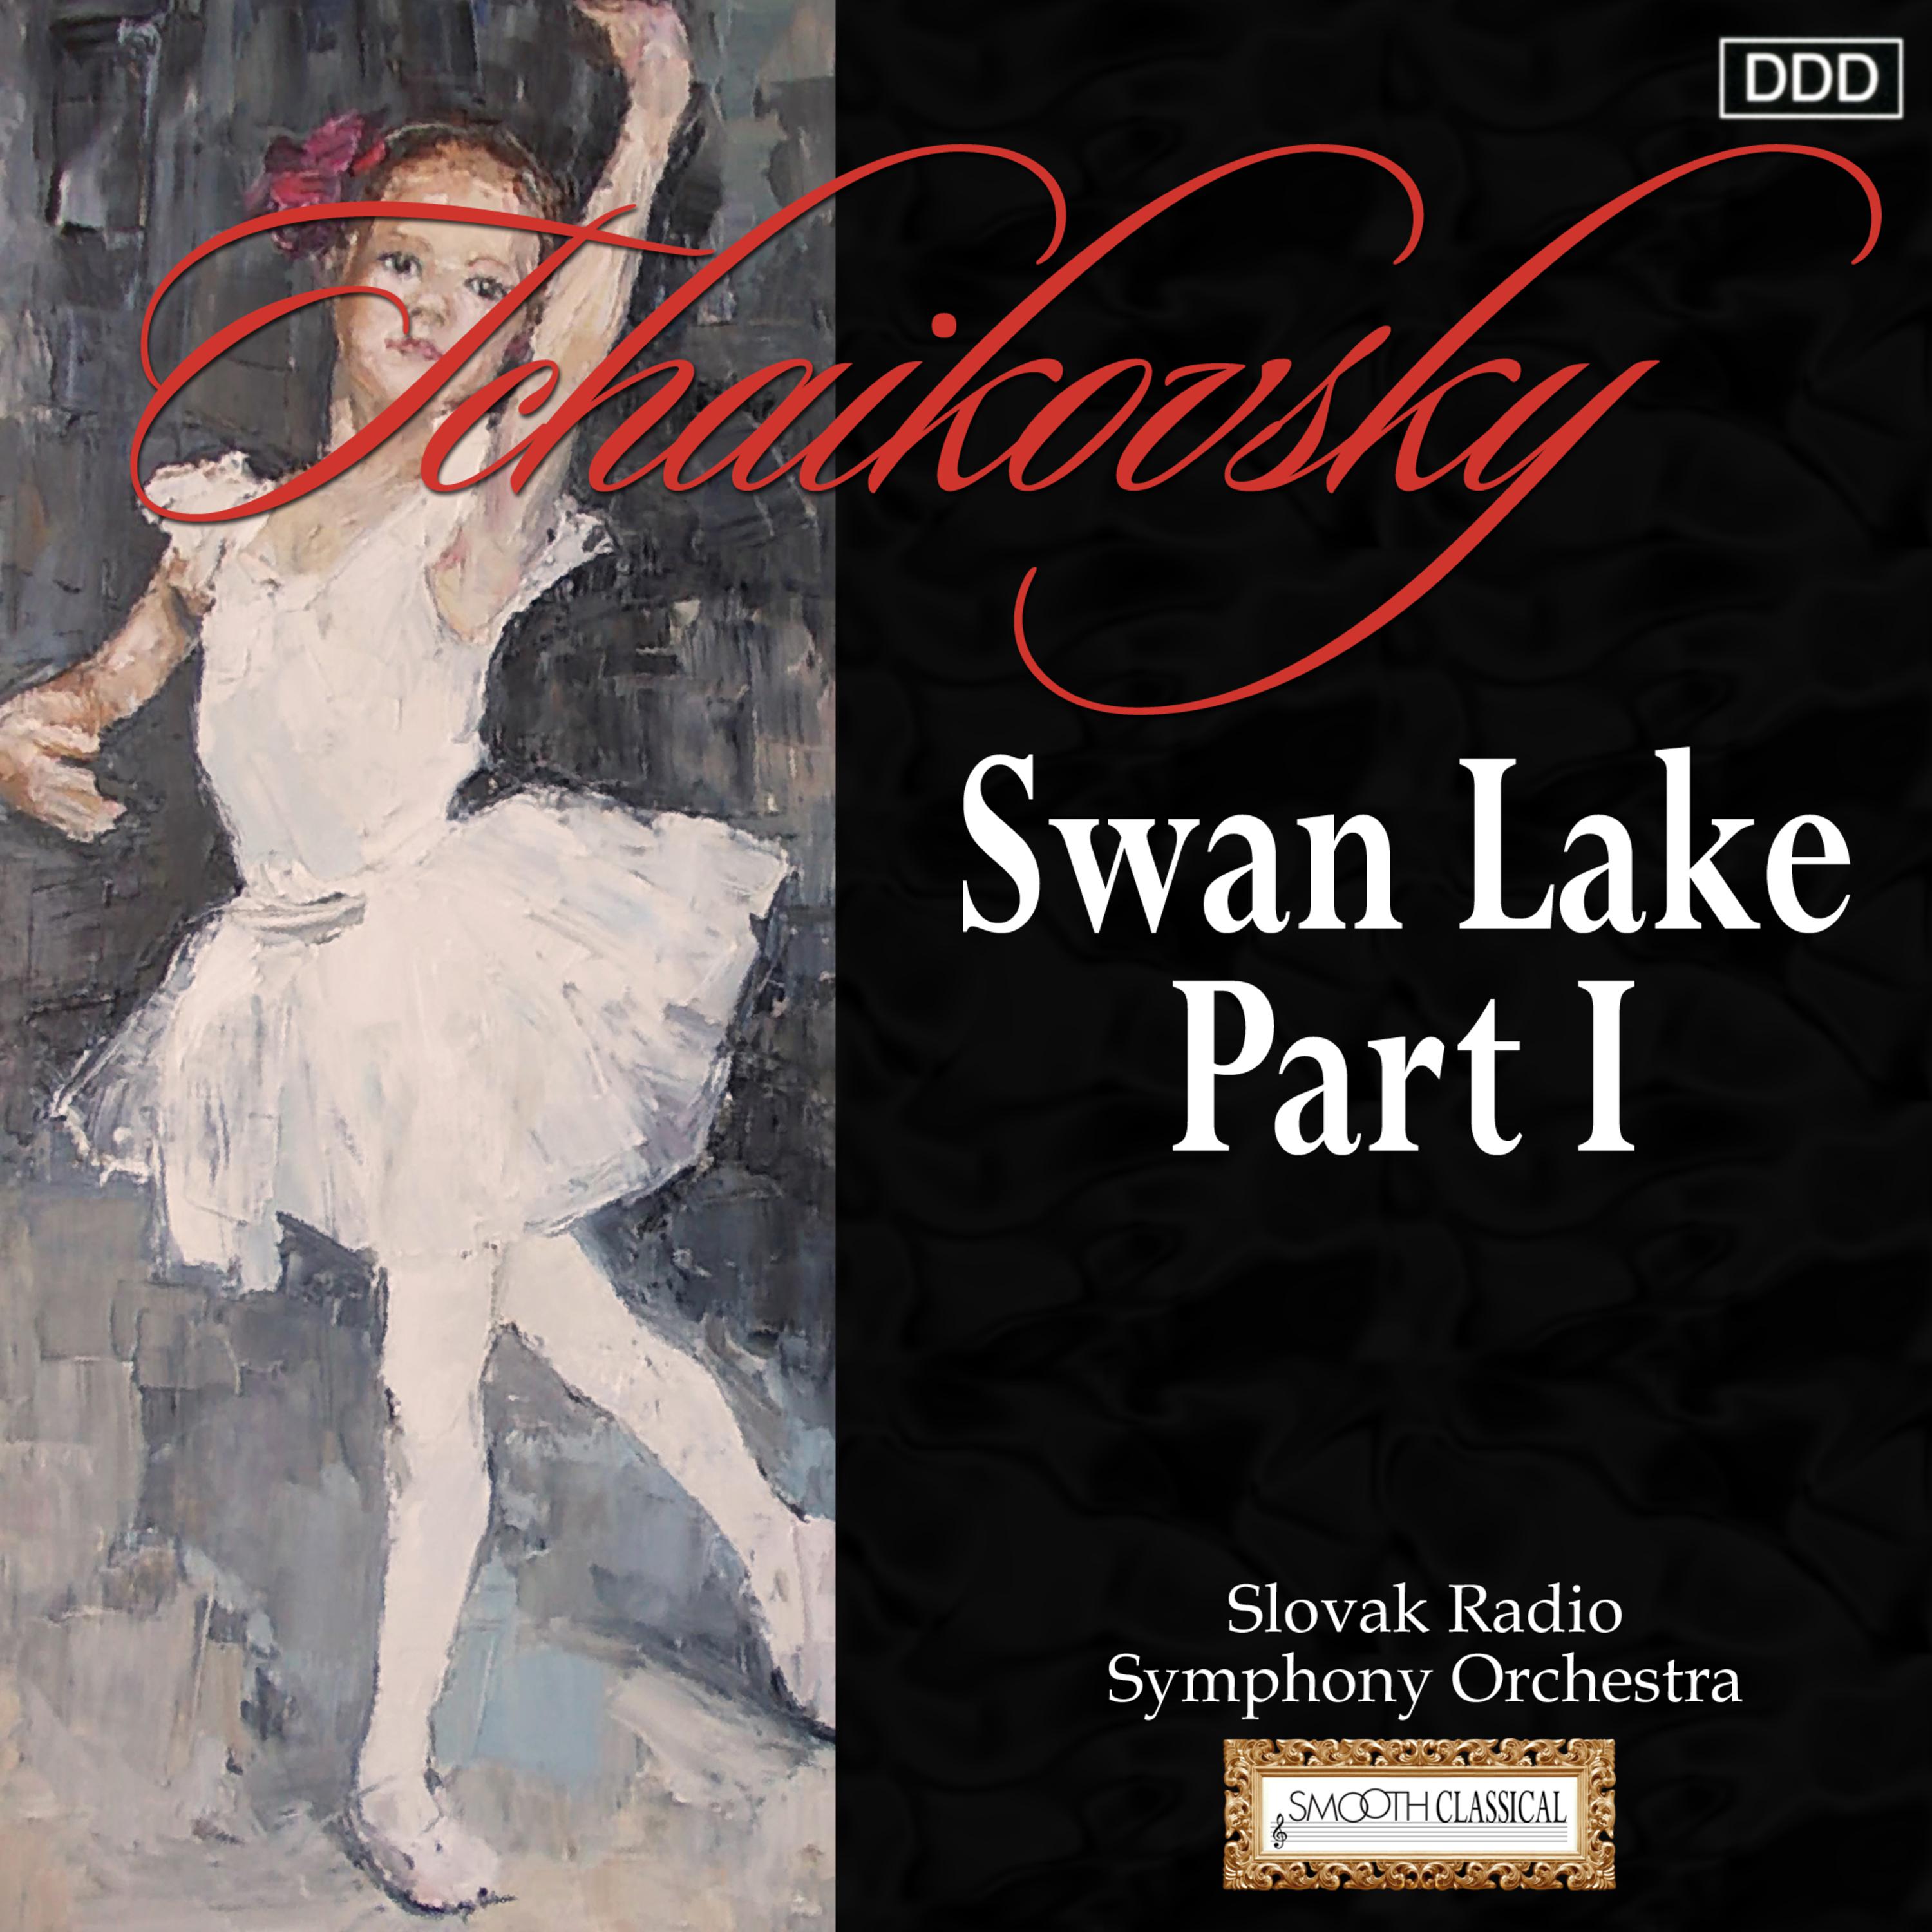 Swan Lake, Op. 20a, Act II: By a Lake: Scene: A group of swans swims near - Prince Siegfried invites Odette to his palace